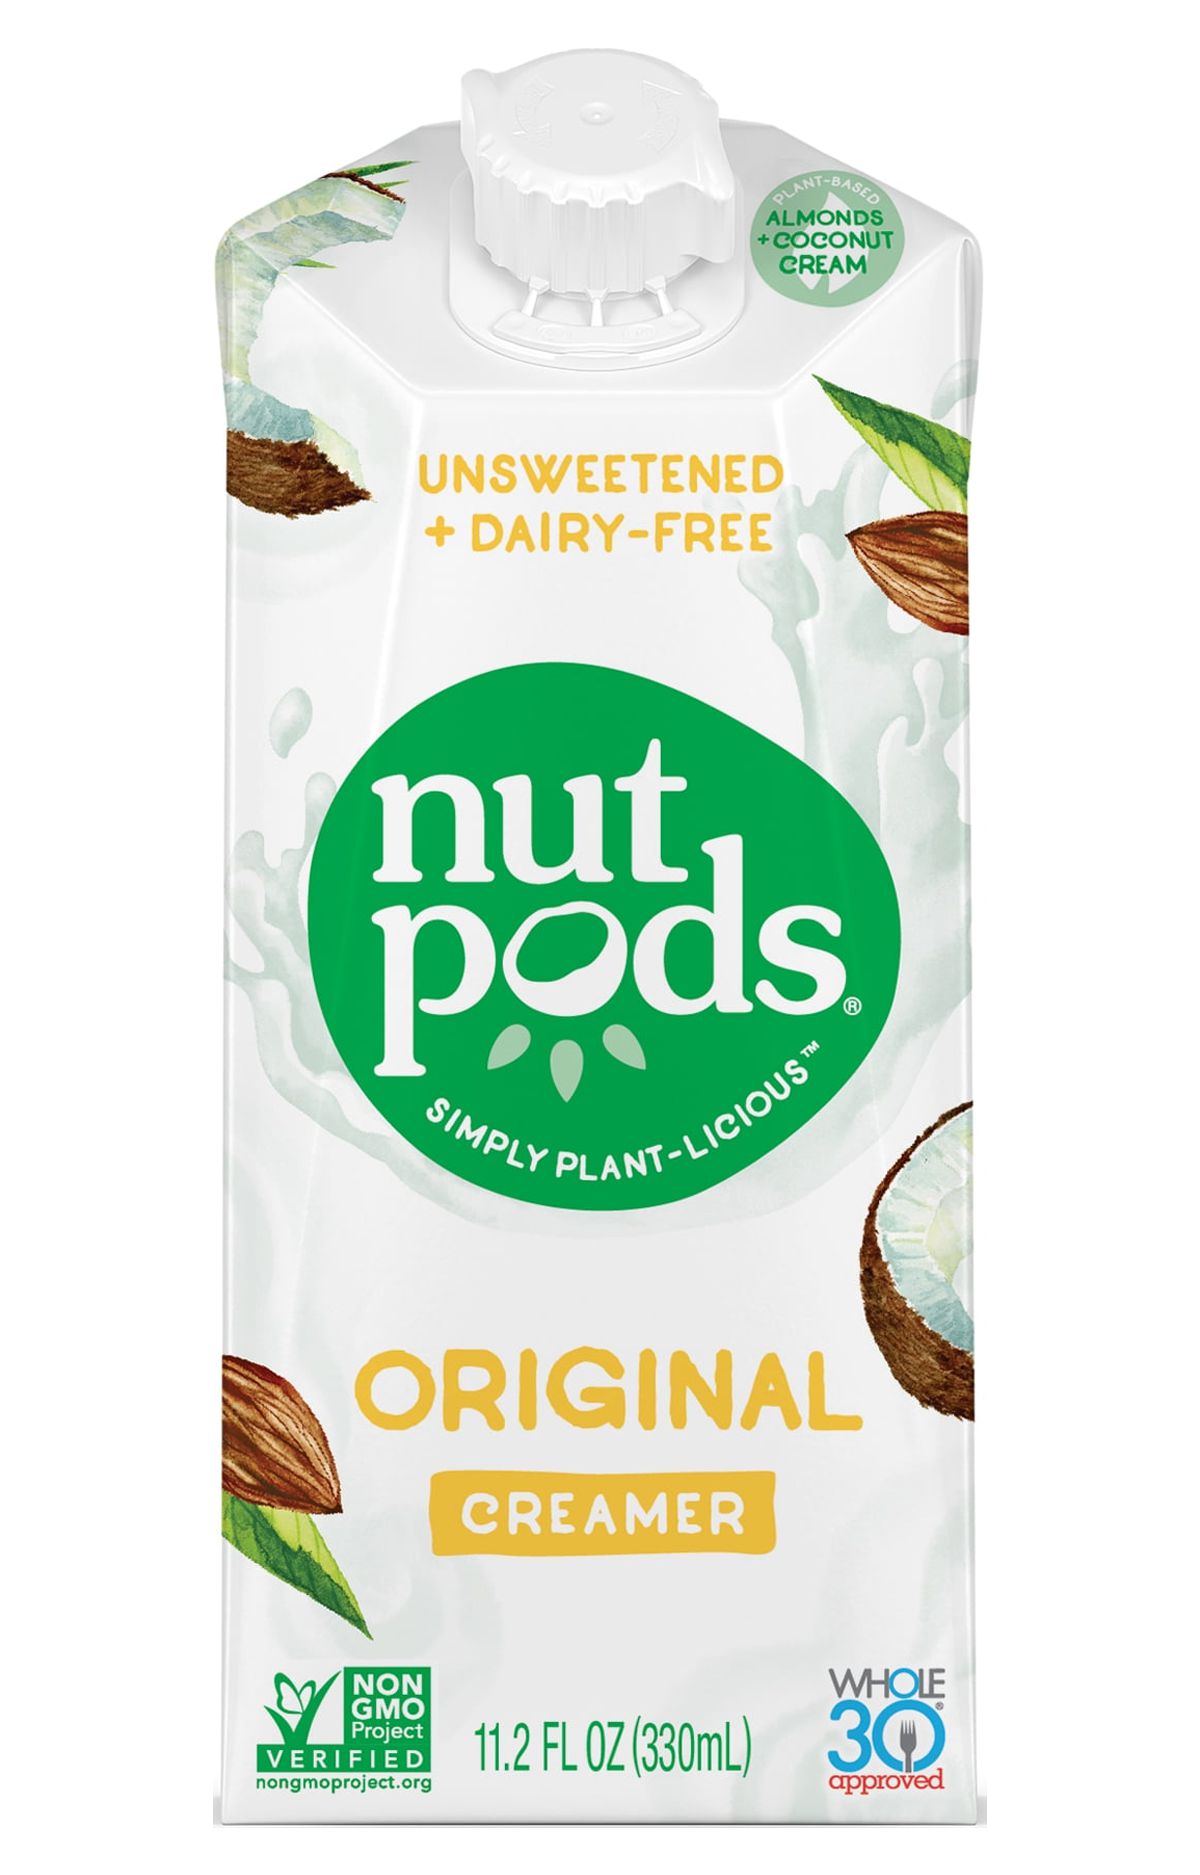 nutpods Unsweetened Original Liquid Coffee Creamer, 11.2 fl oz Container | Dairy-free, Keto, Non-GMO, Made From Coconut and Almond - image 1 of 8